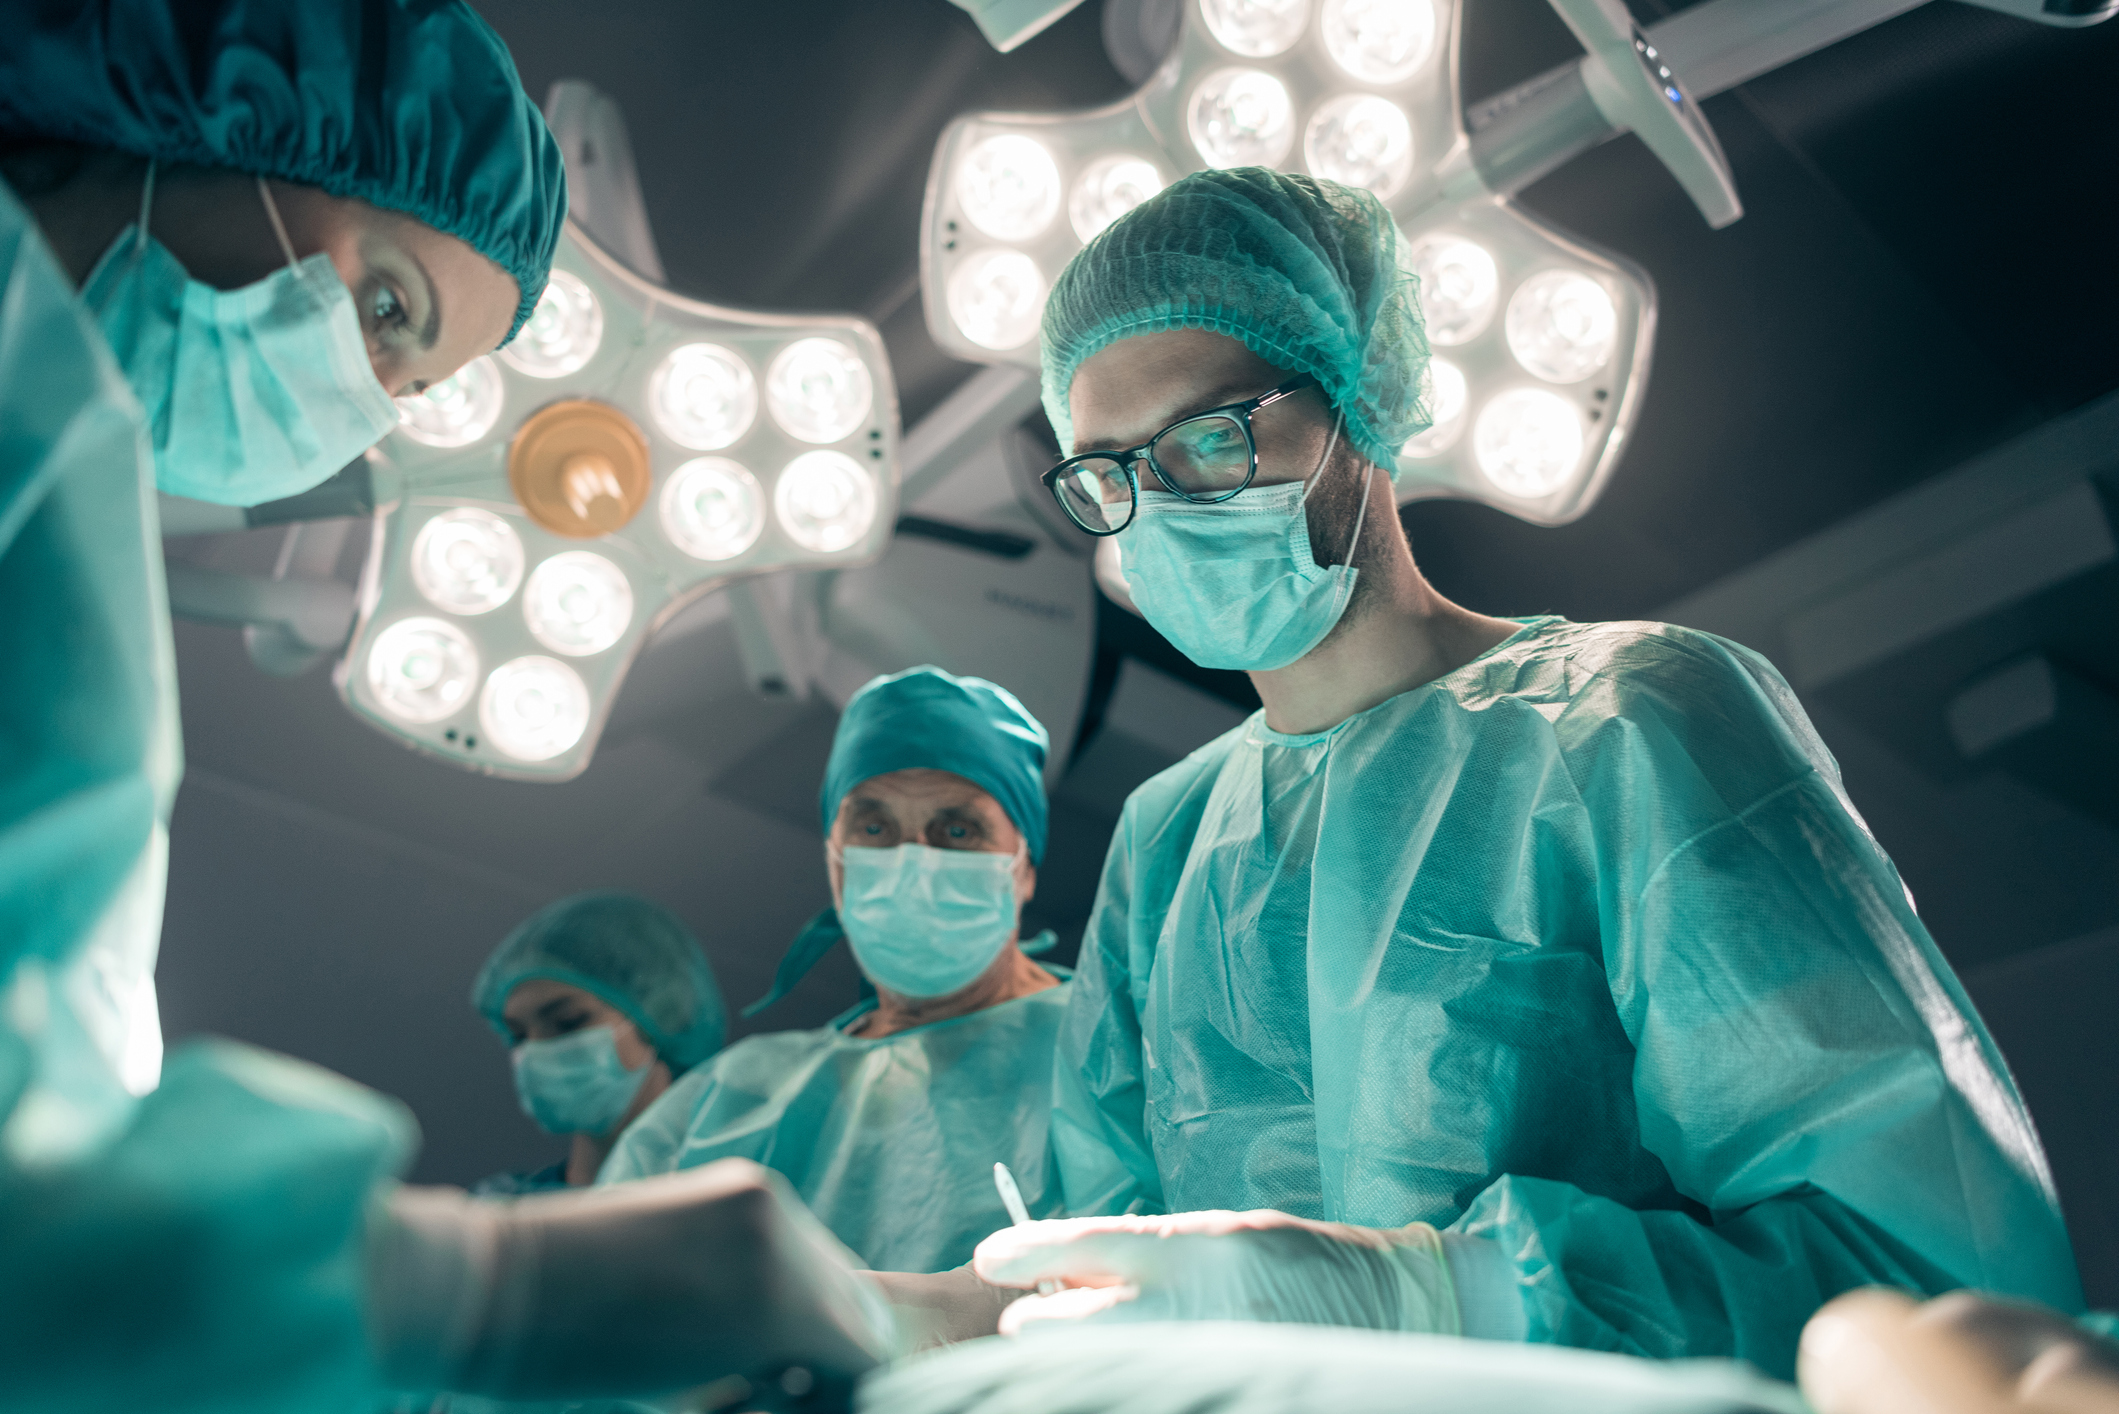 Focused and concentrated young surgeon performing surgical operation in modern operating room